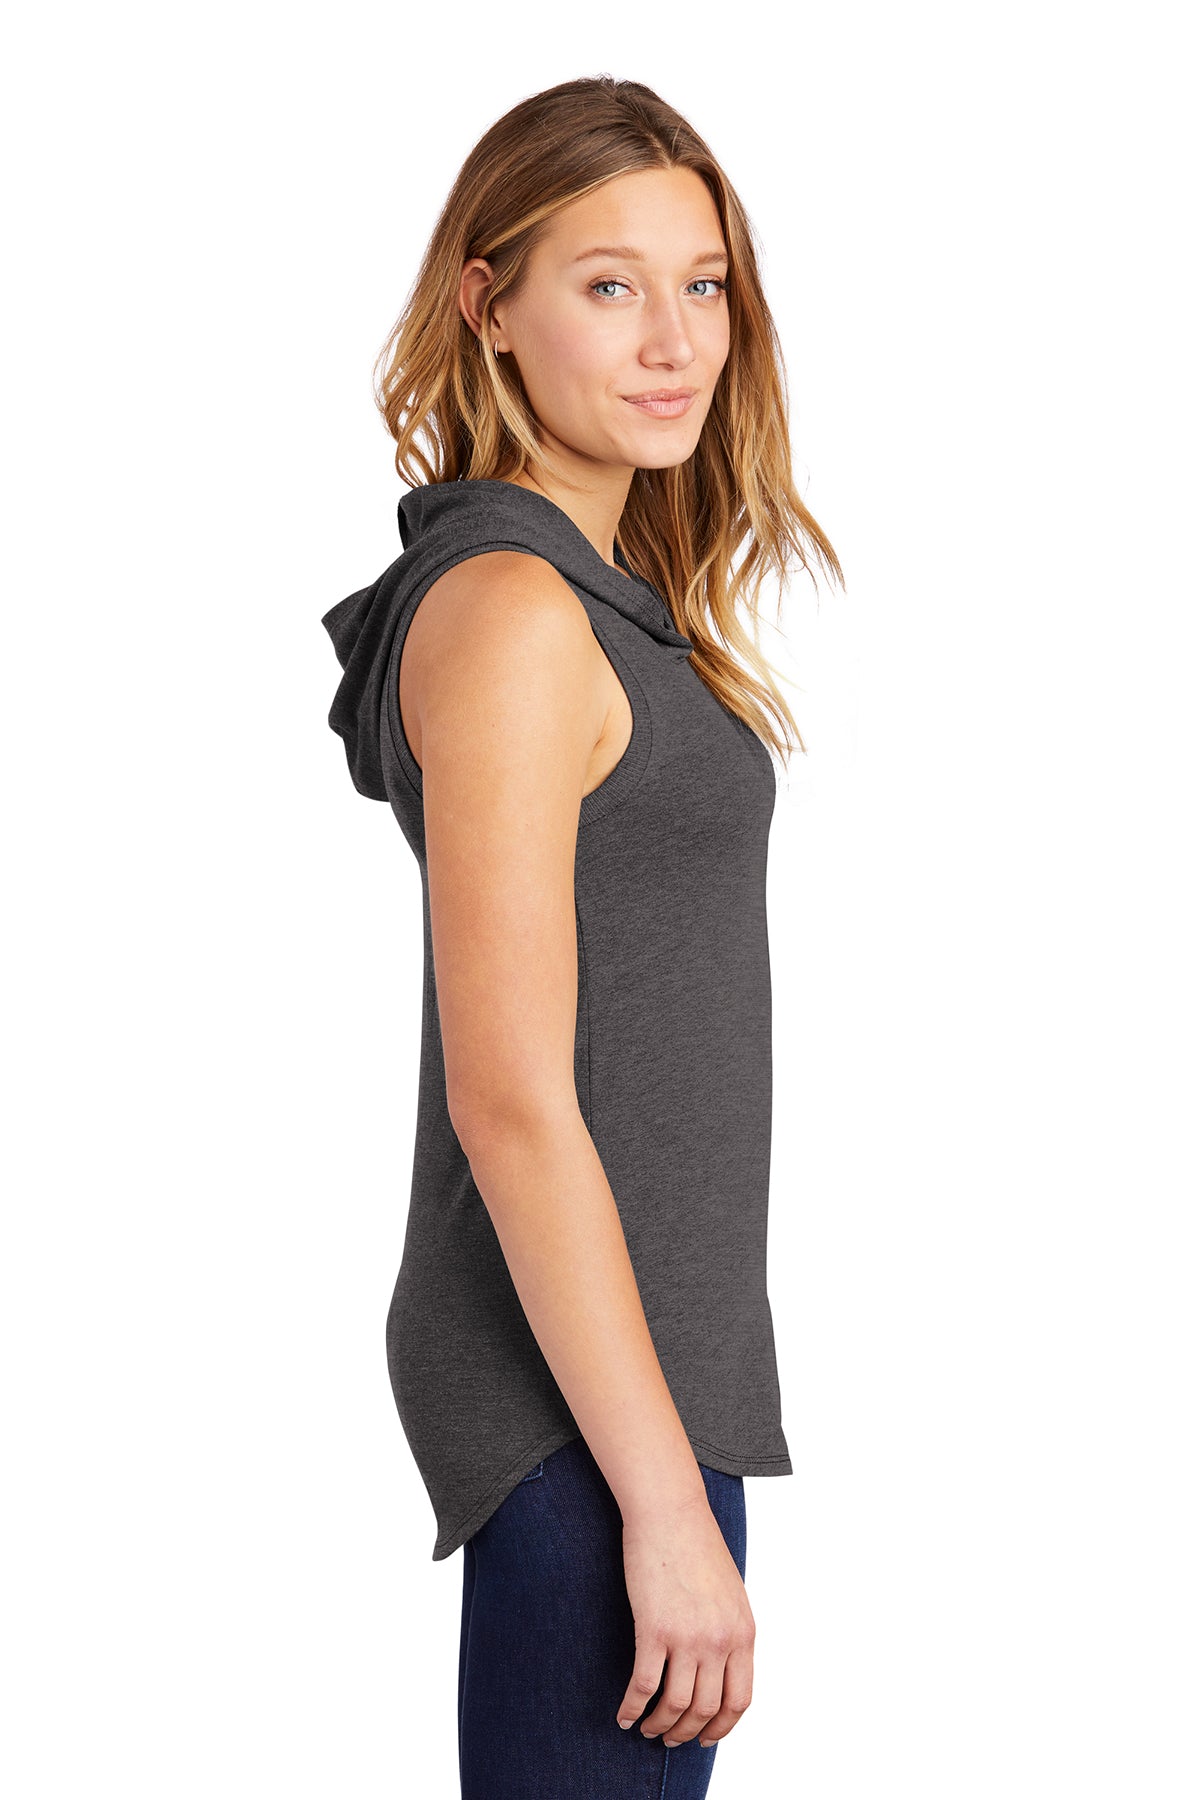 Campbell-Savona DT1375 District ® Women’s Perfect Tri ® Sleeveless Hoodie